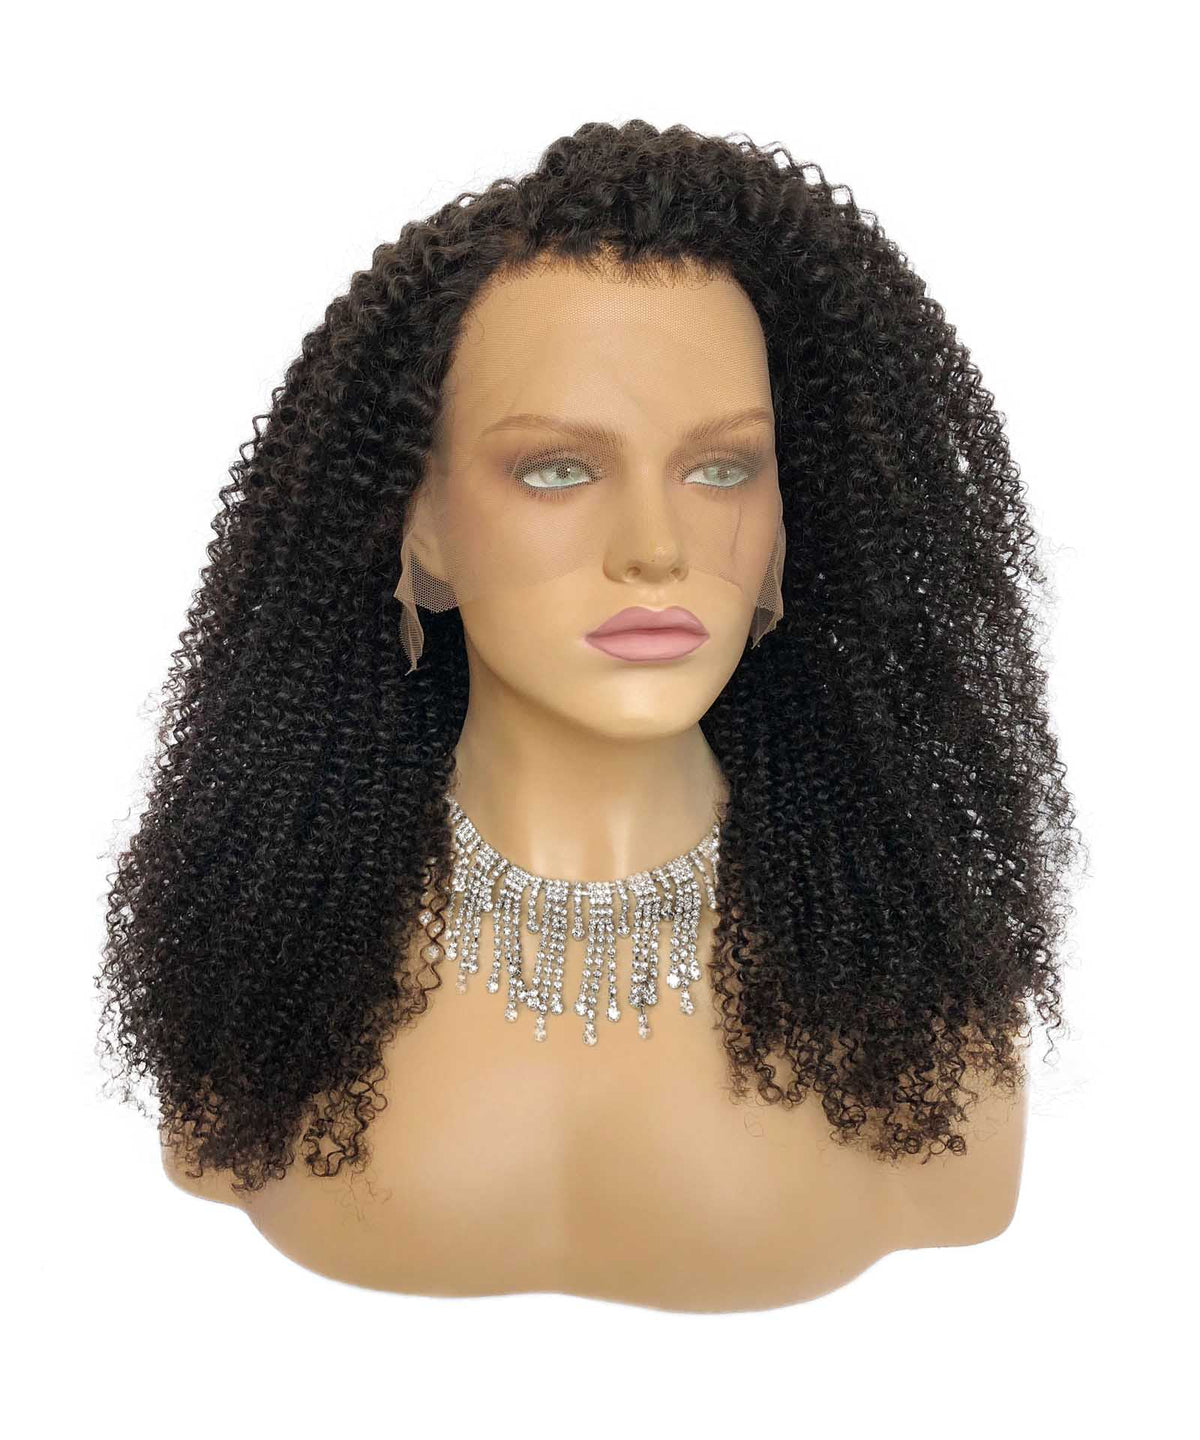 Wigs for African Americans